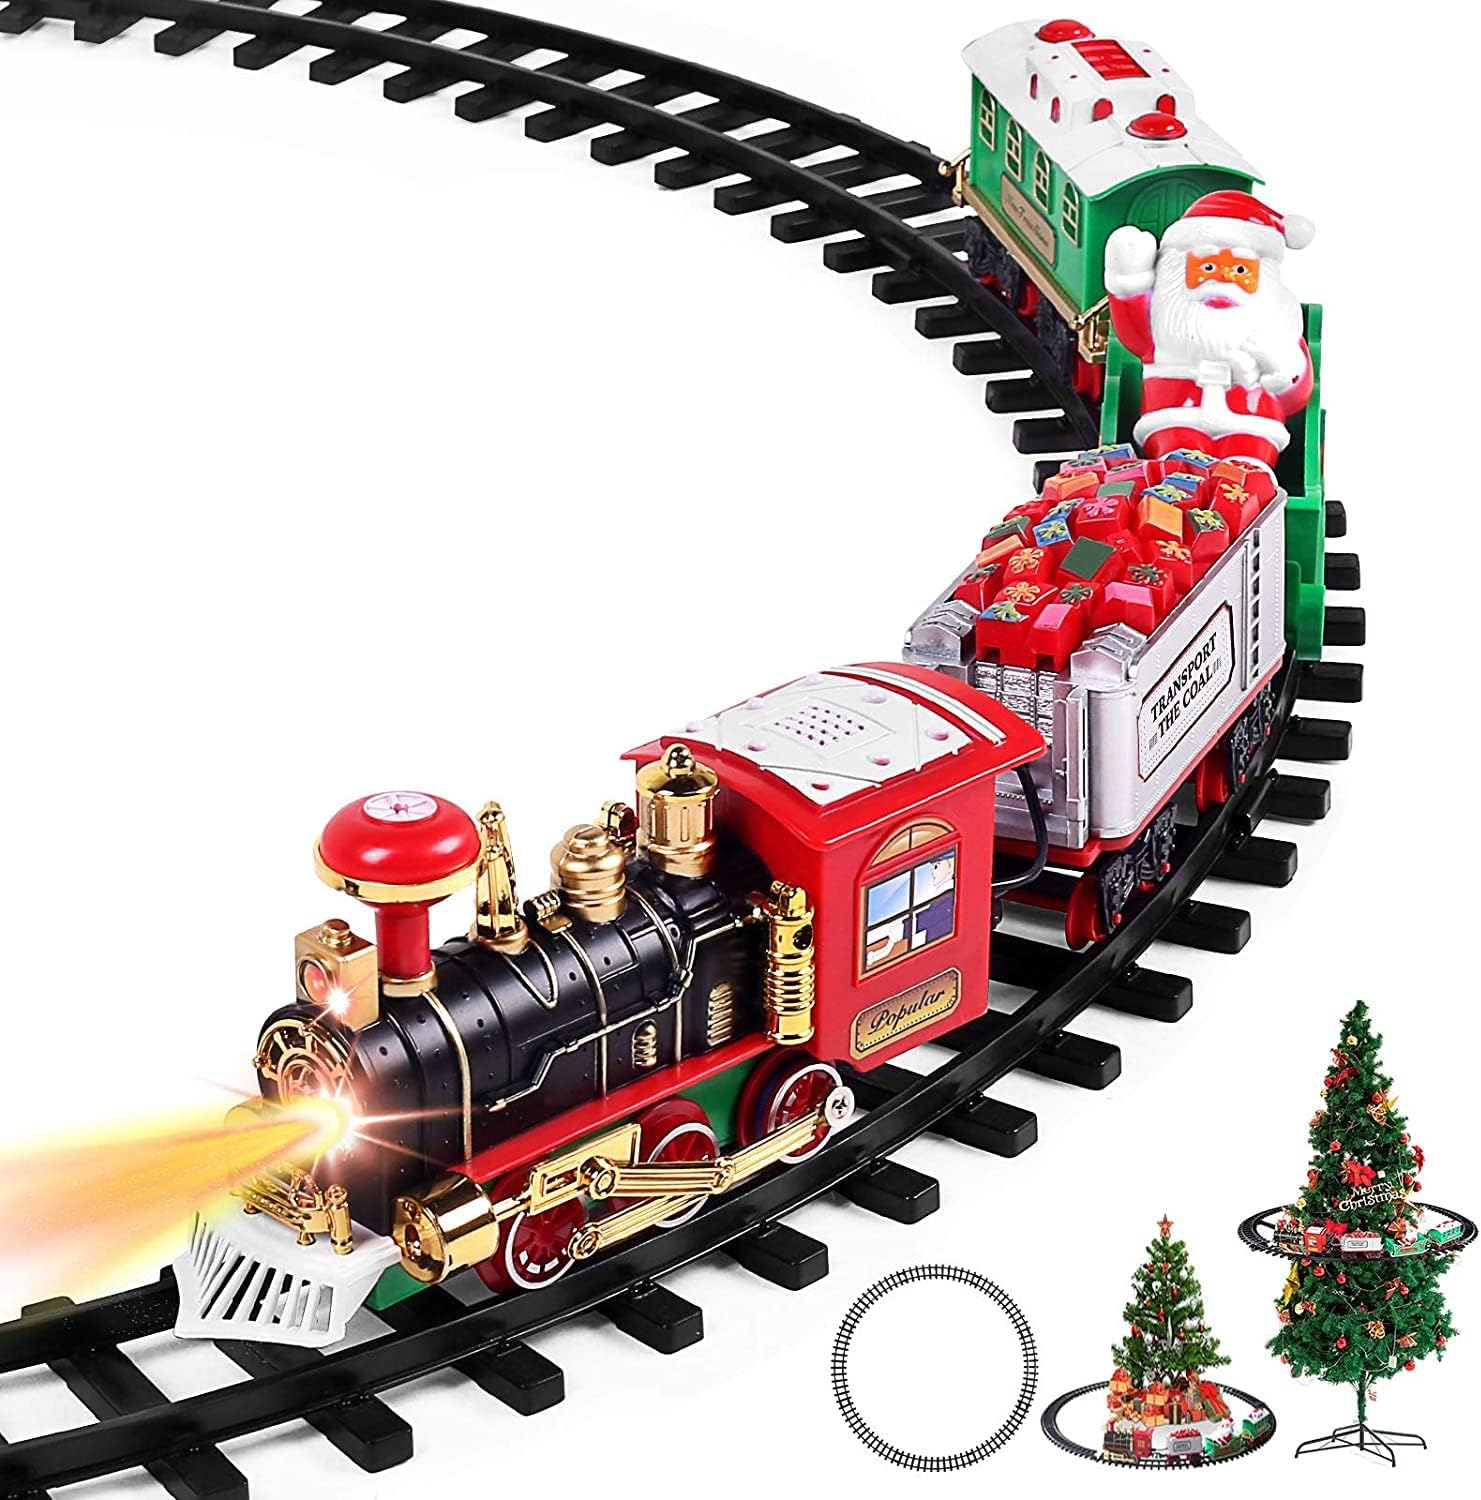 AOKESI Electric Train Set for Kids, Battery-Powered Train Toys with Light, Railway Kits w/Steam Locomotive Engine, Cargo Cars & Tracks, Classic Toy Train Set Gifts for 3 4 5 6 Years Old Boys Girls